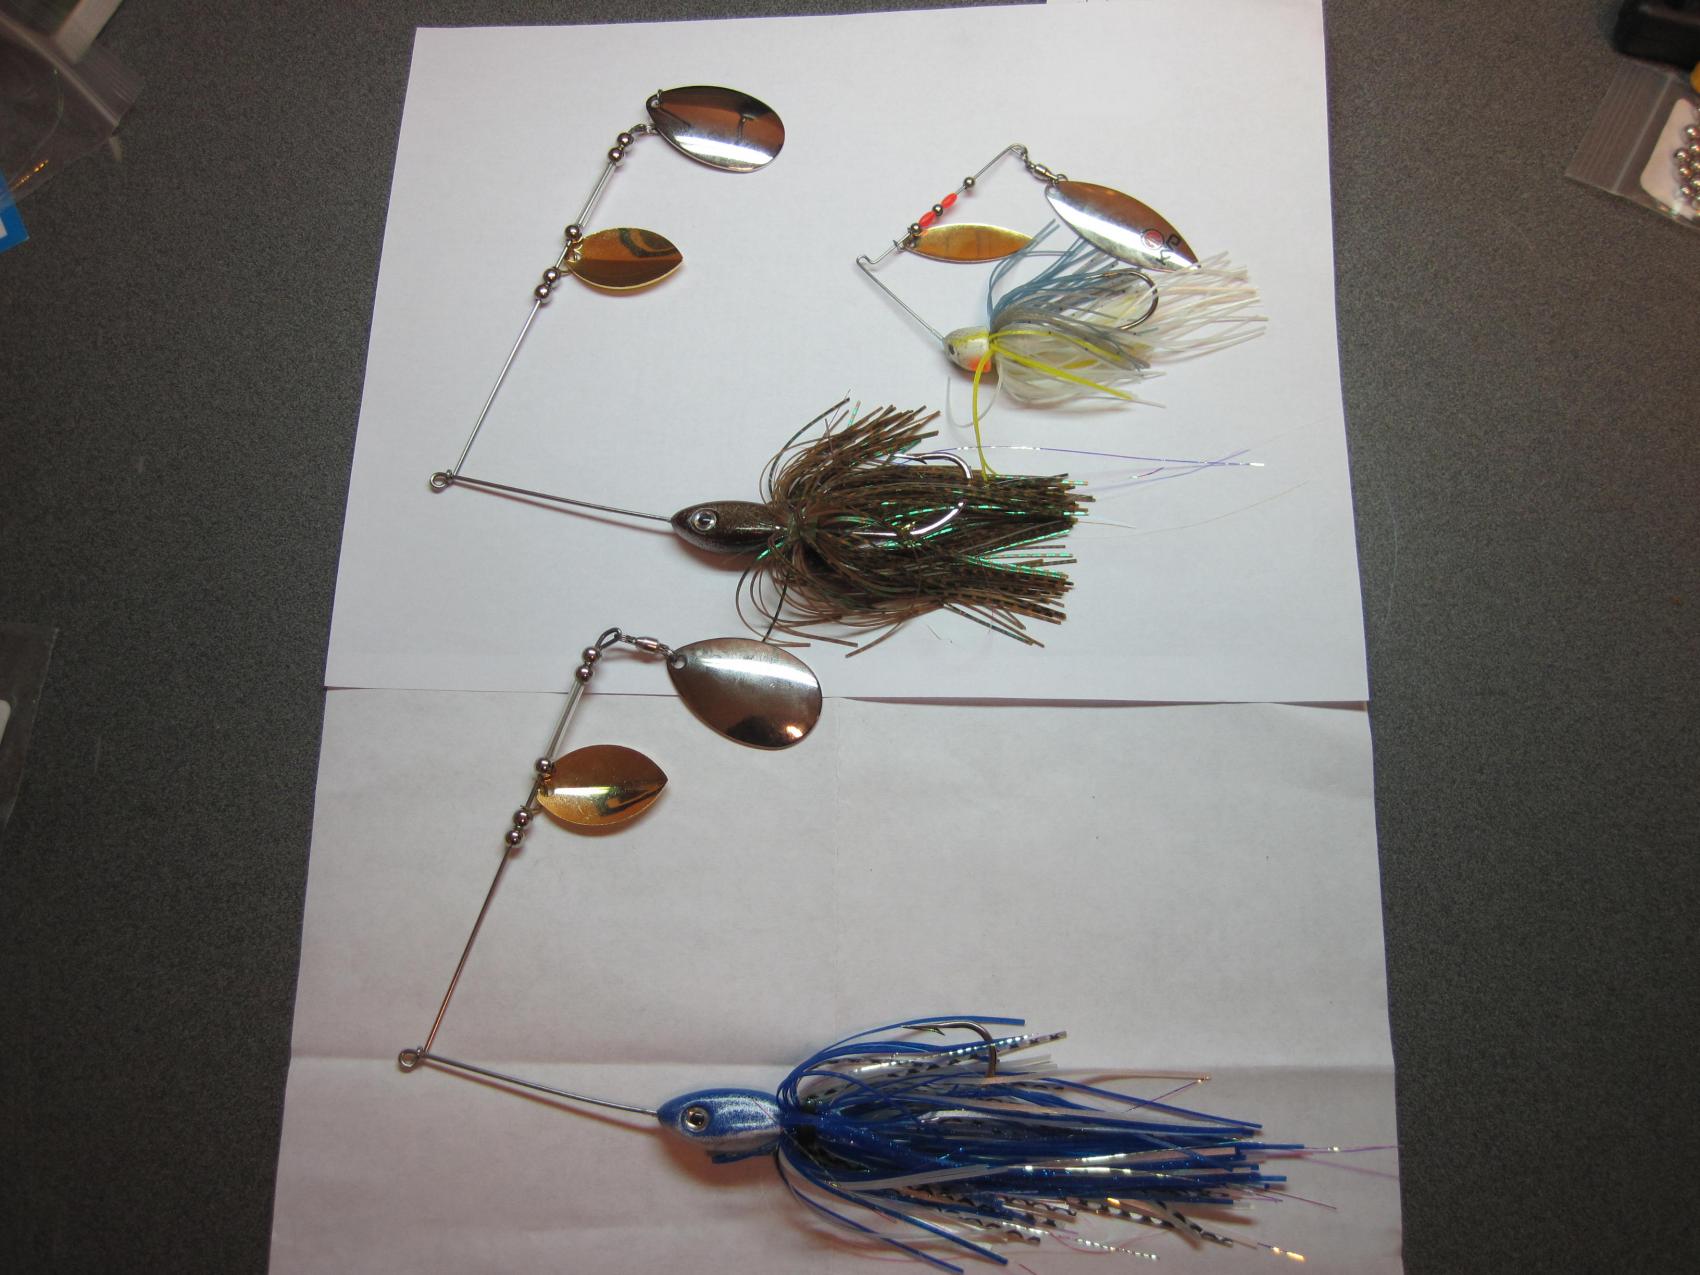 these are both 1 1/2 oz. lures, on bottom has a larger 7" skirt the top has a 5" skirt  next to a smaller 5/8oz.